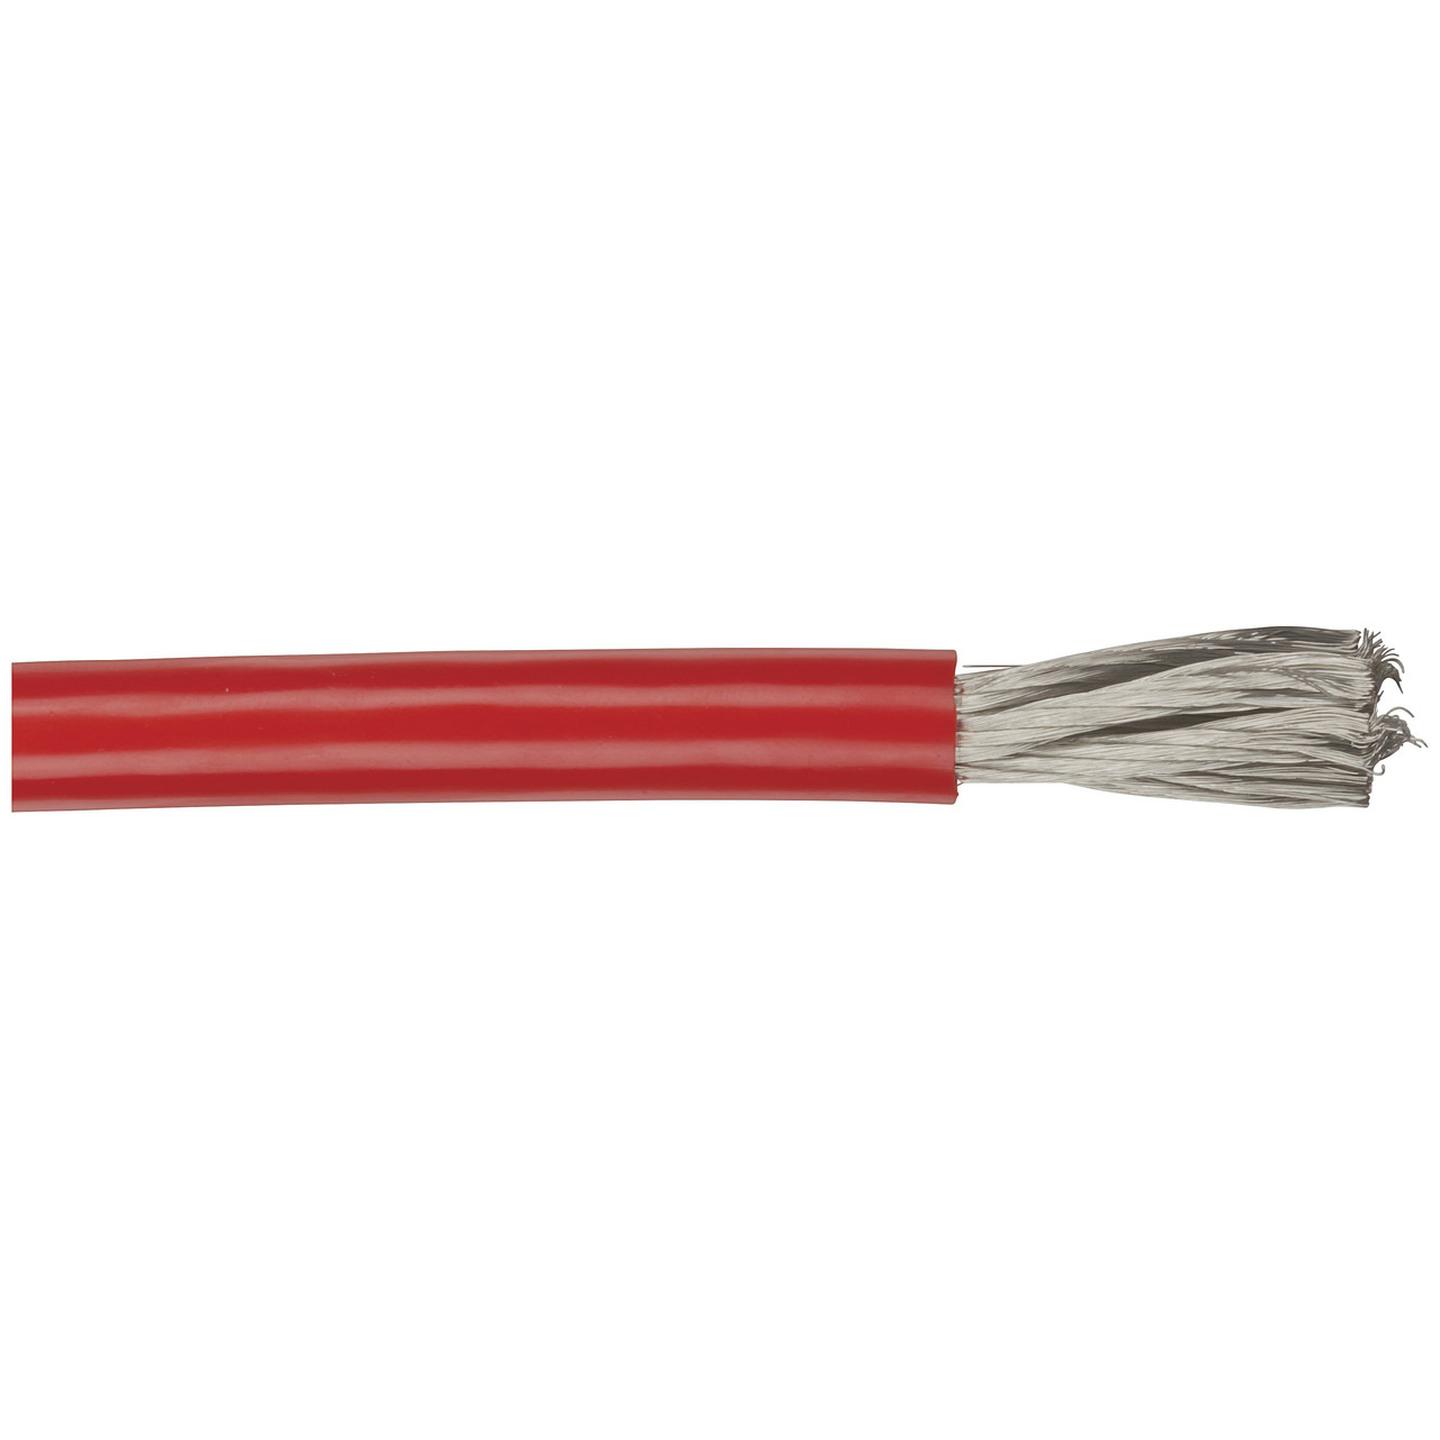 RED 4GA OFC Super High Current Power Cable